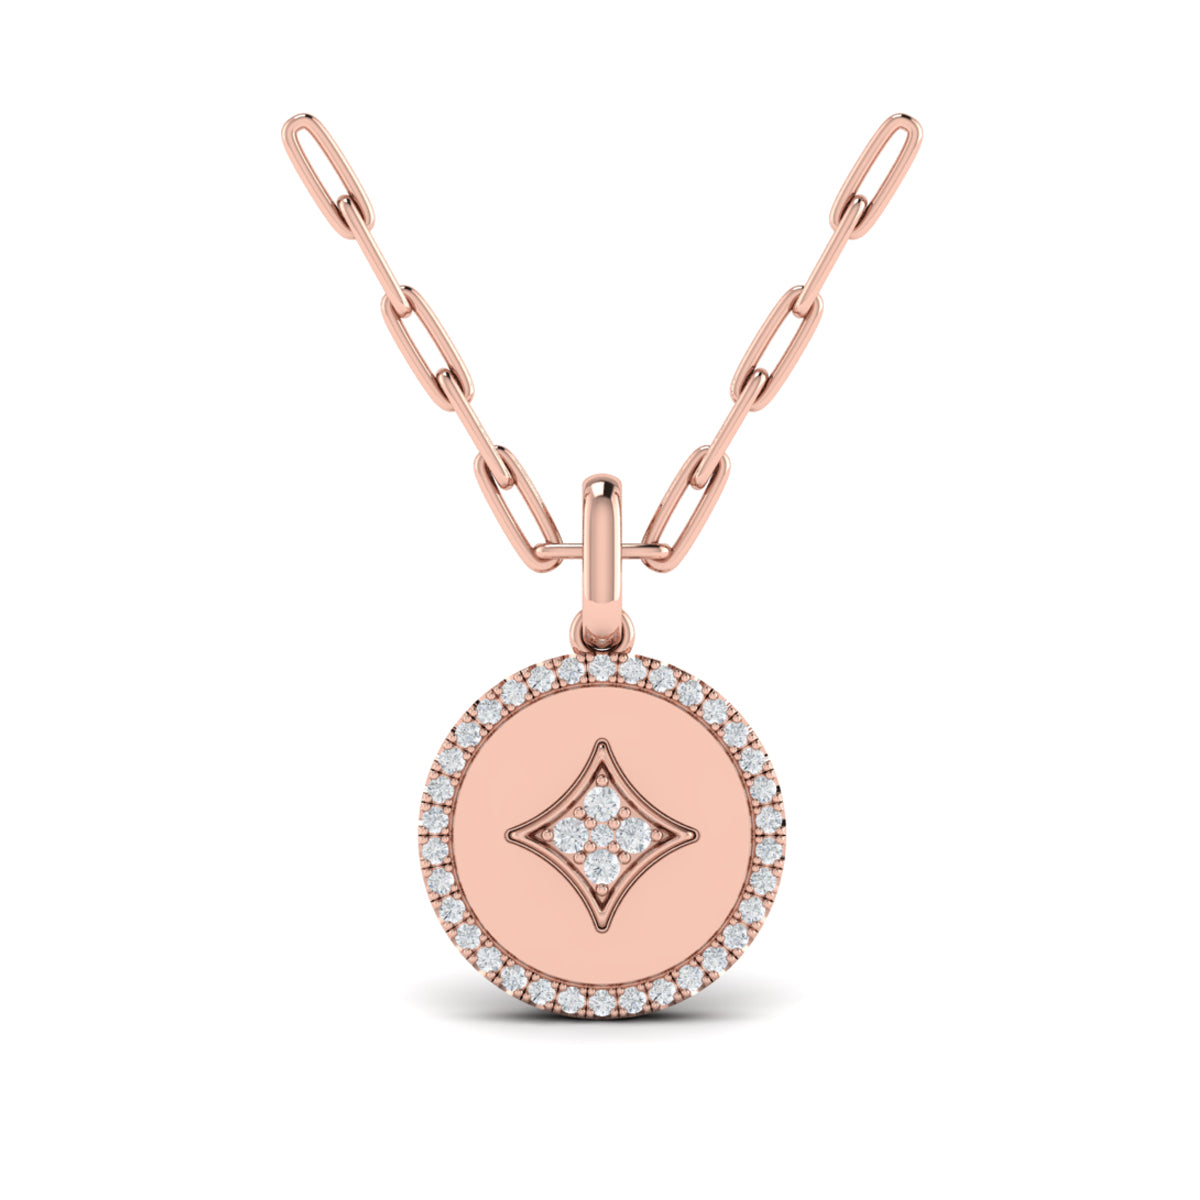 Louis Vuitton Idylle Blossom Necklace in 18k White Gold 0.2 CTW